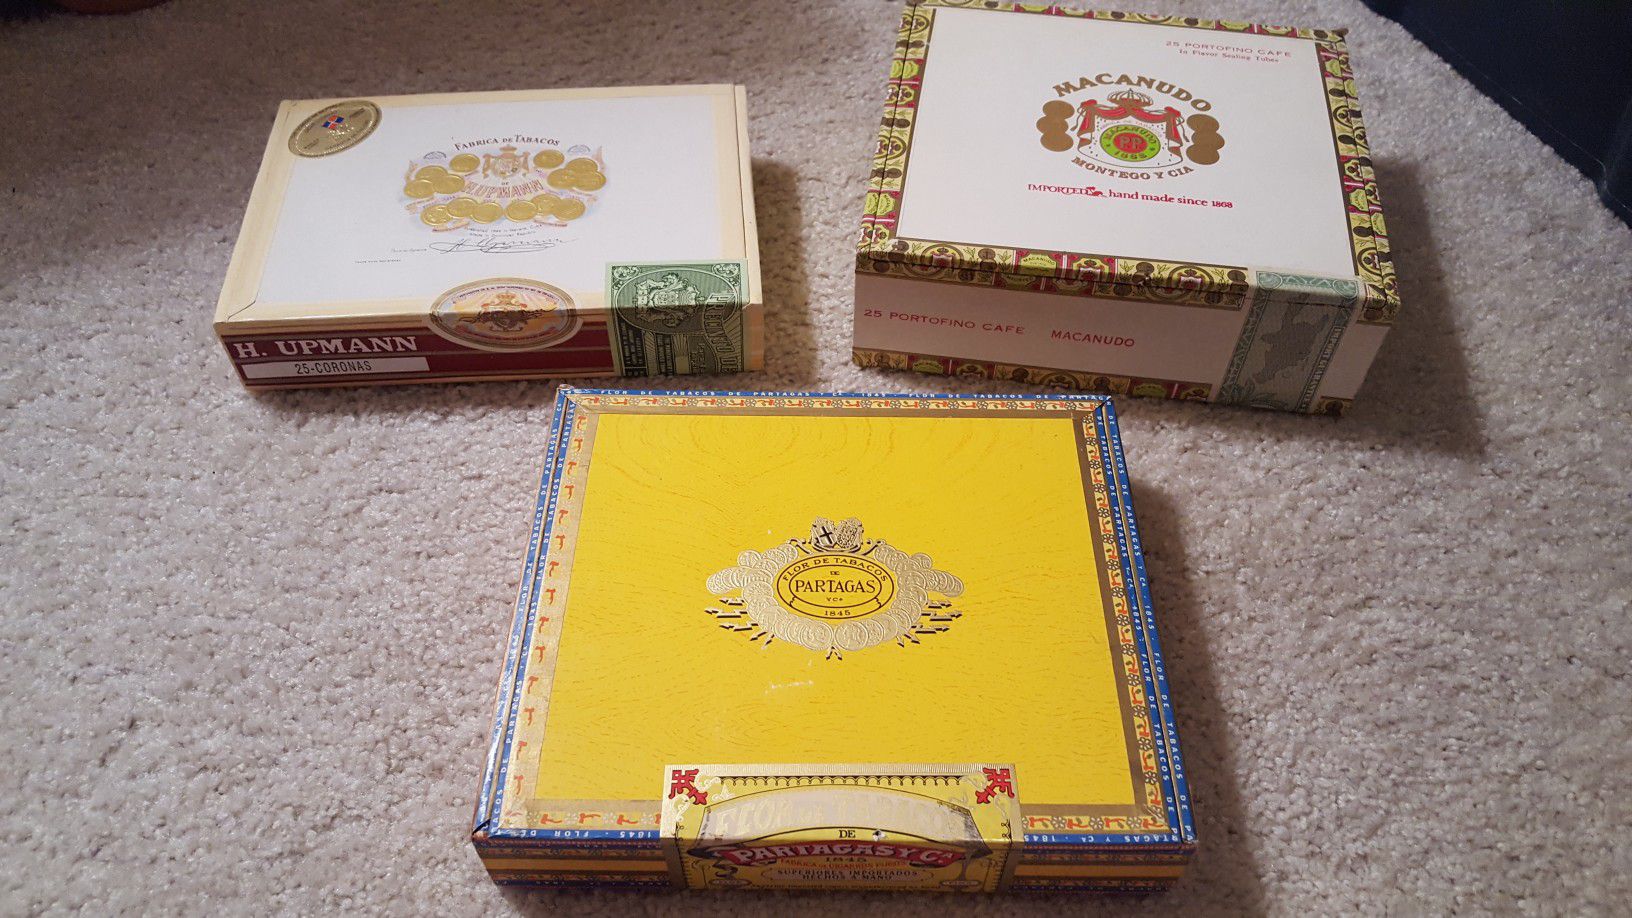 Three cigars boxes, approximately 30 years old, excellent condition